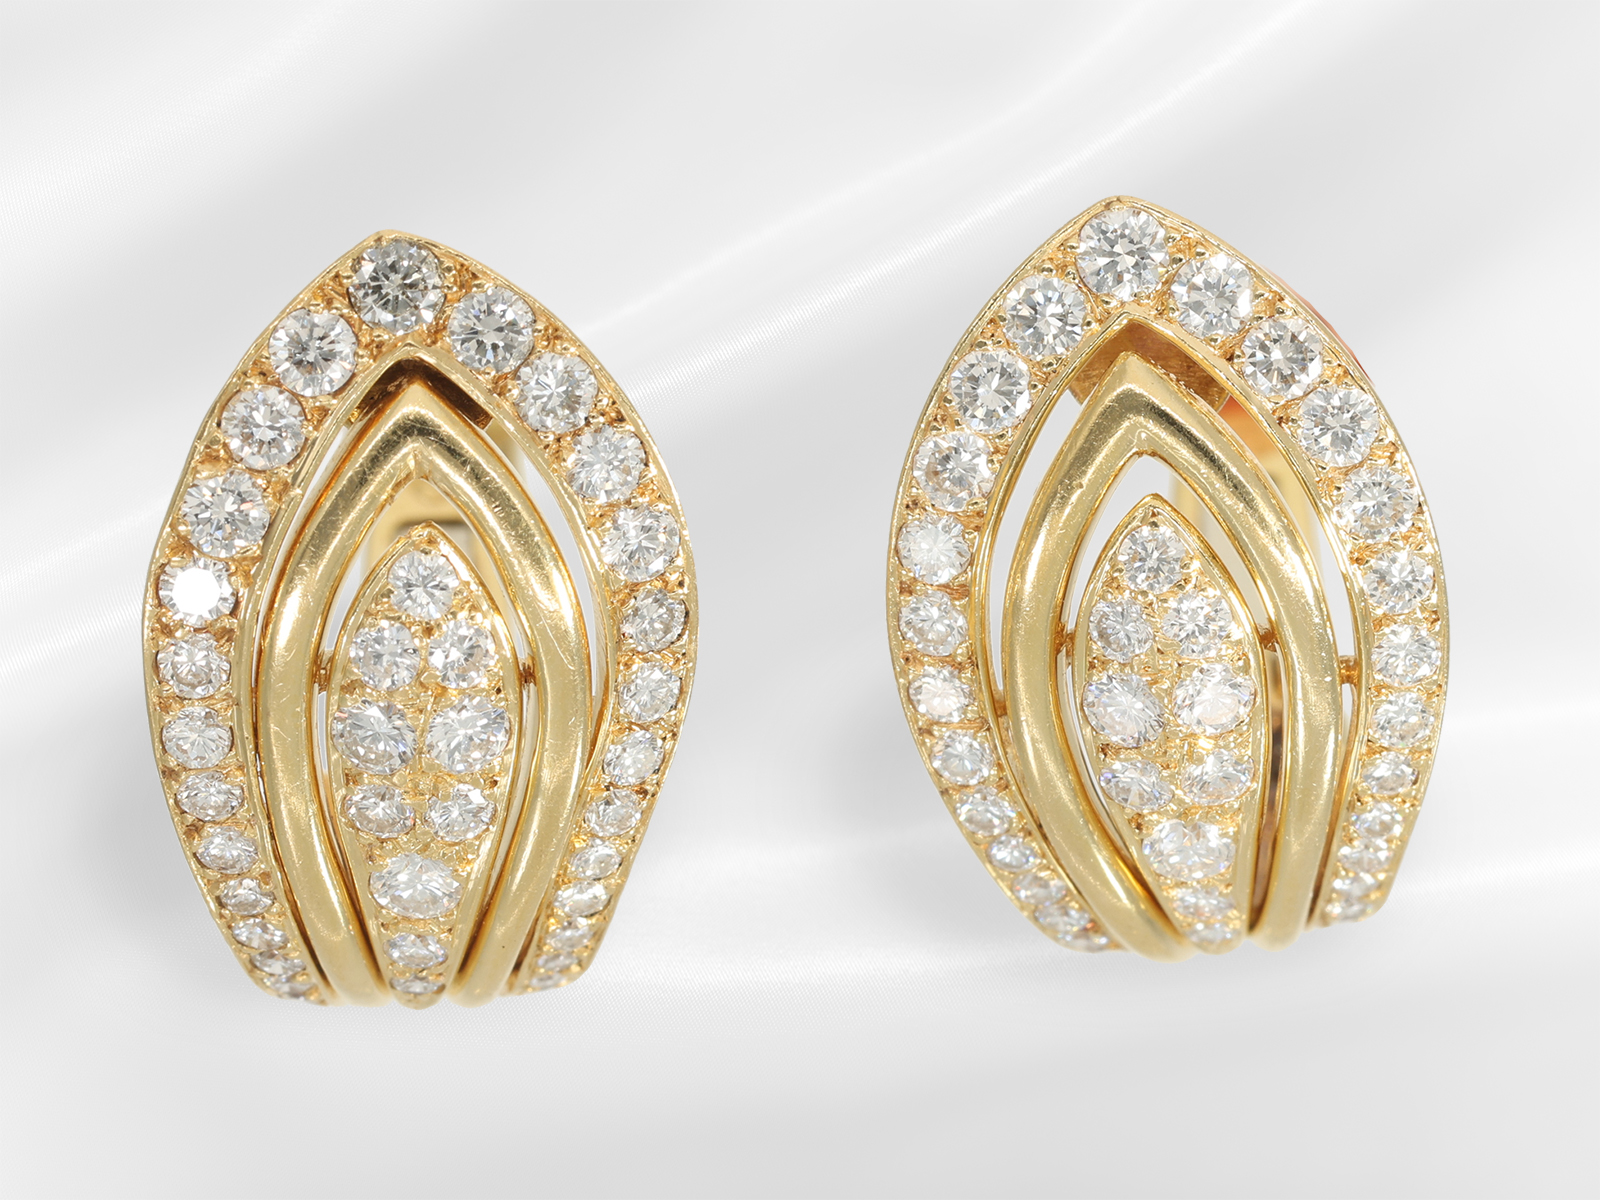 Earrings: high-quality vintage designer brilliant-cut diamond jewellery by Cartier, approx. 1.8ct - Image 3 of 4